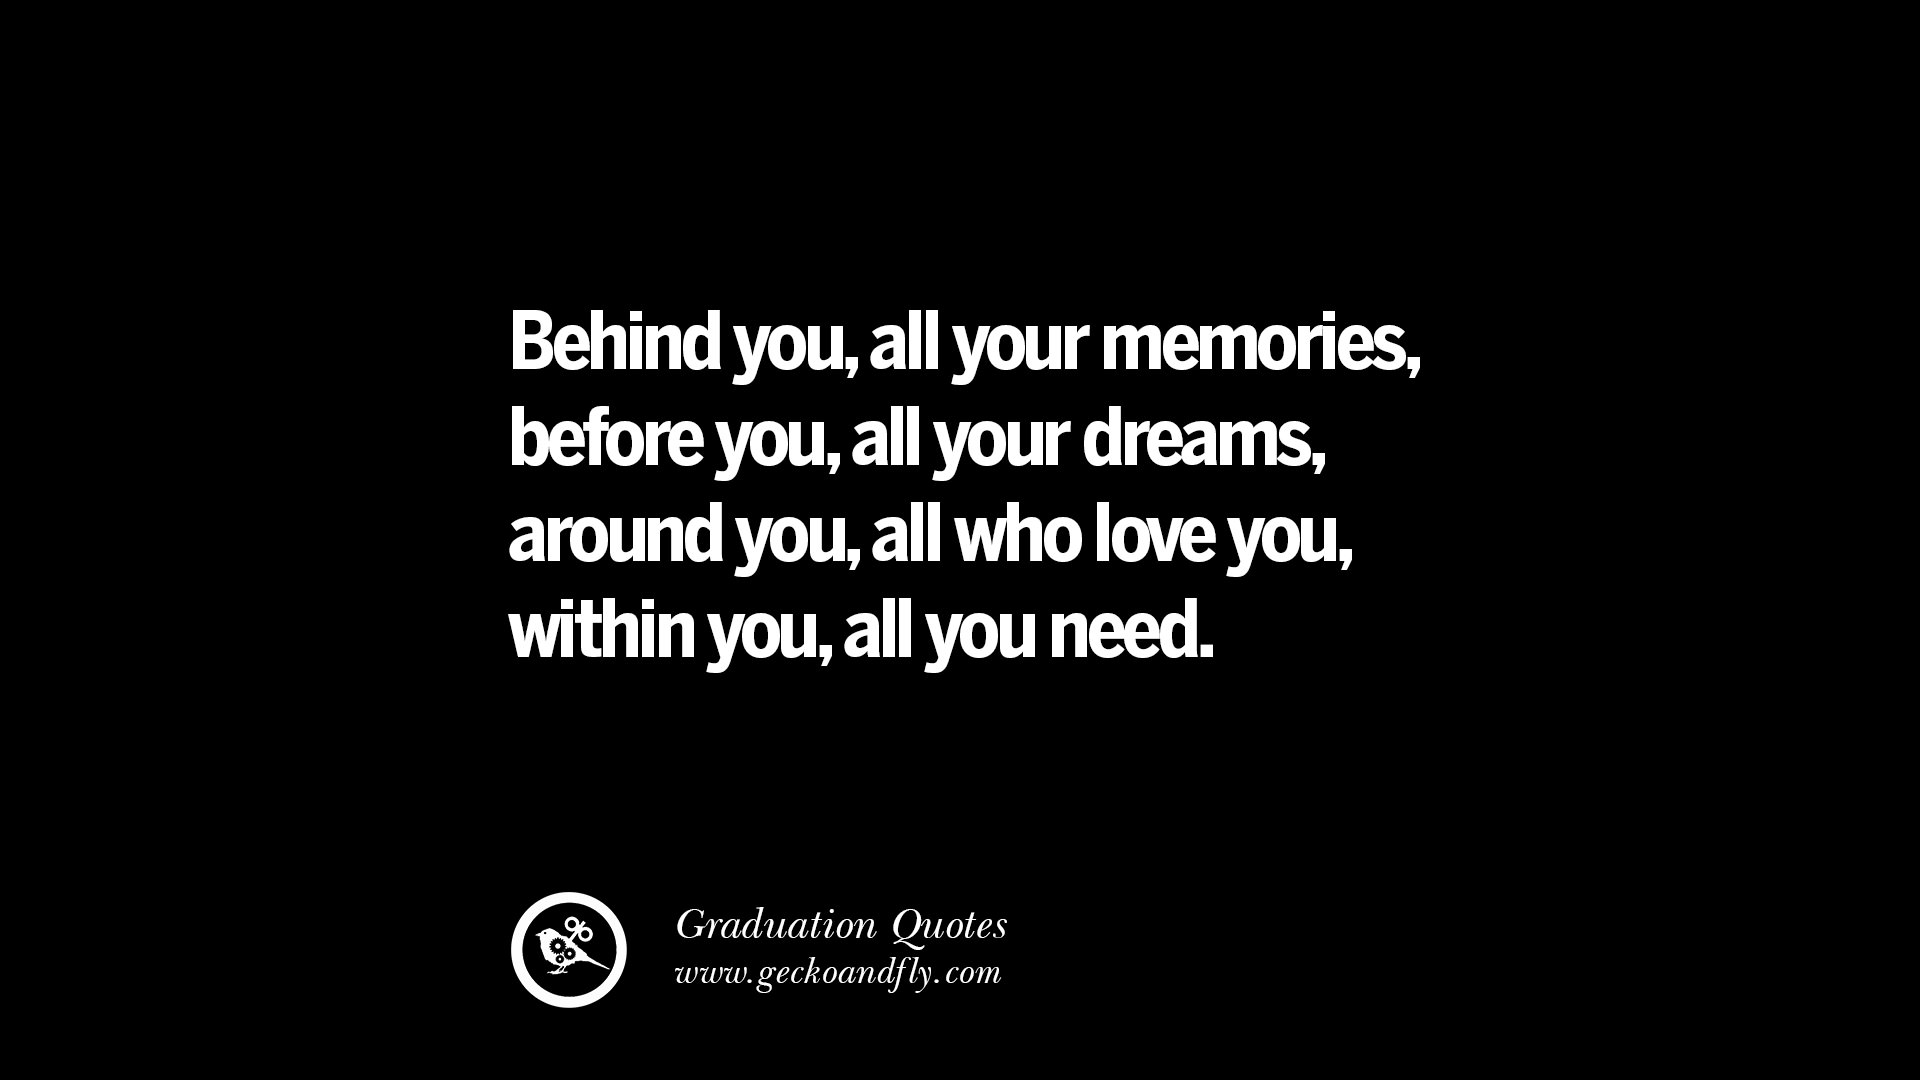 Behind You All Your Memories Before You All Your Dreams Around You All Who Love You Within You All You Need